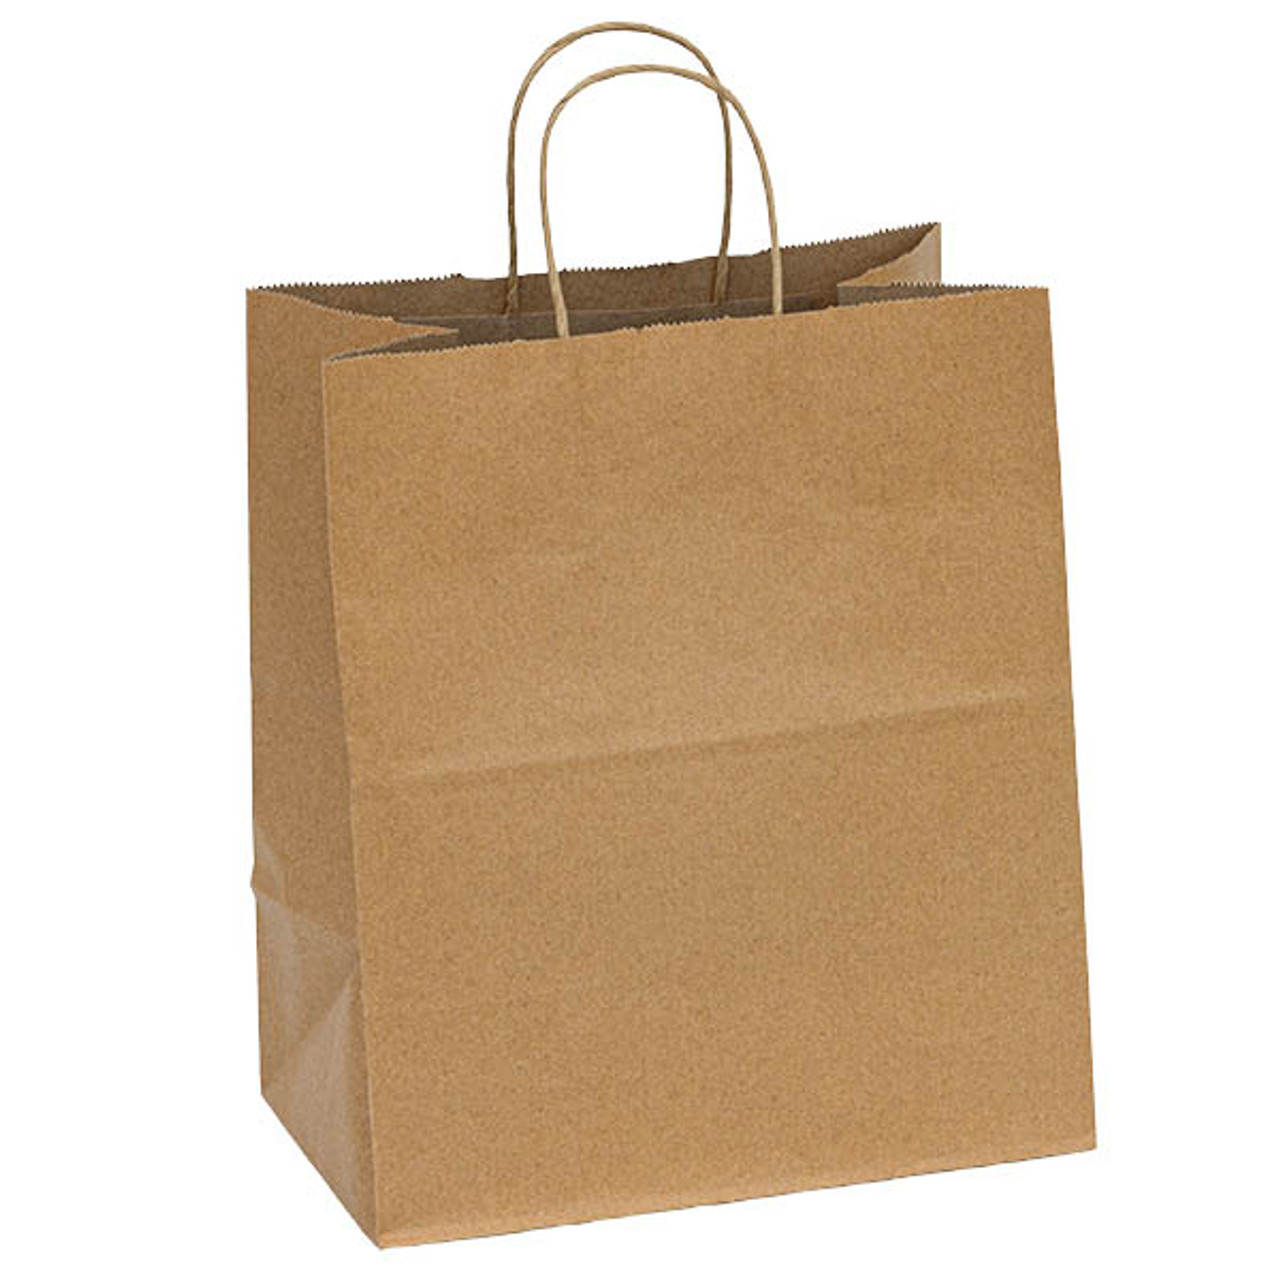 Paper Bags with Handles, Shopping Bags